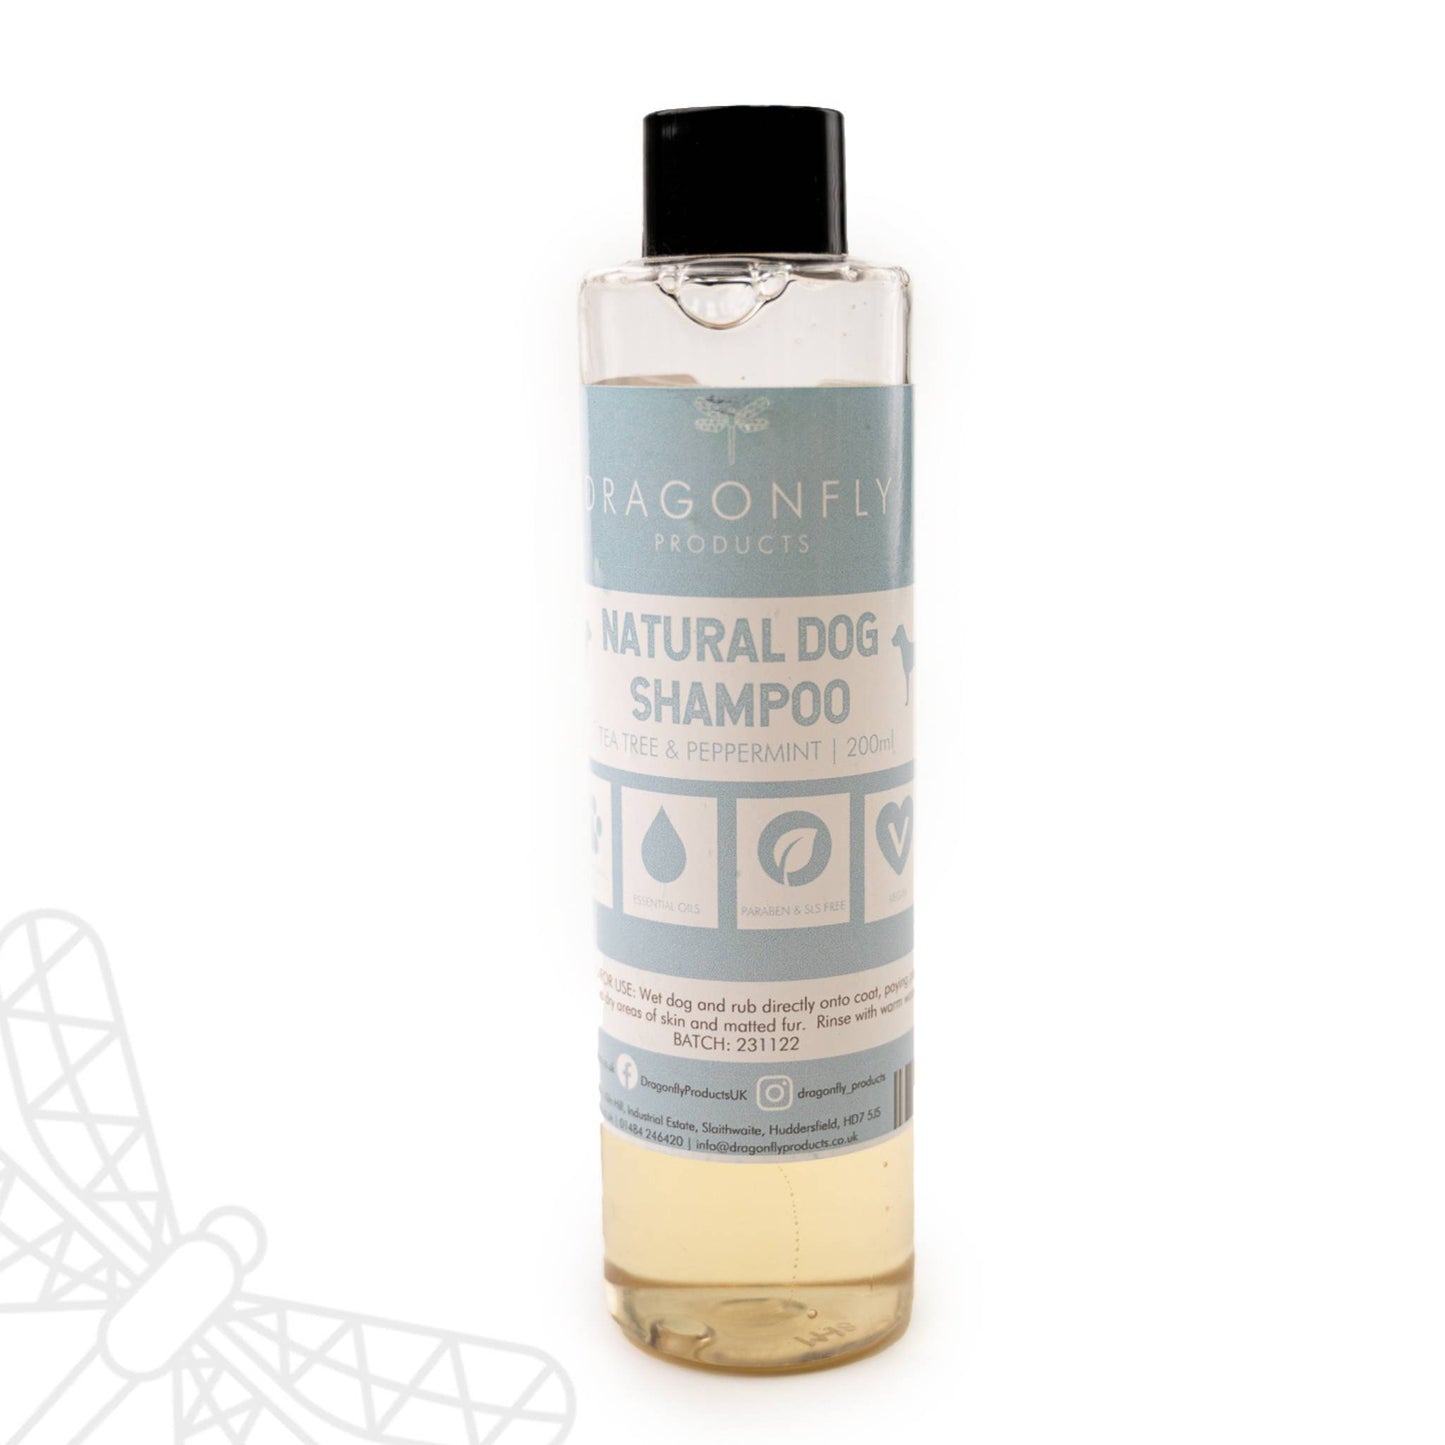 Natural shampoo for dogs